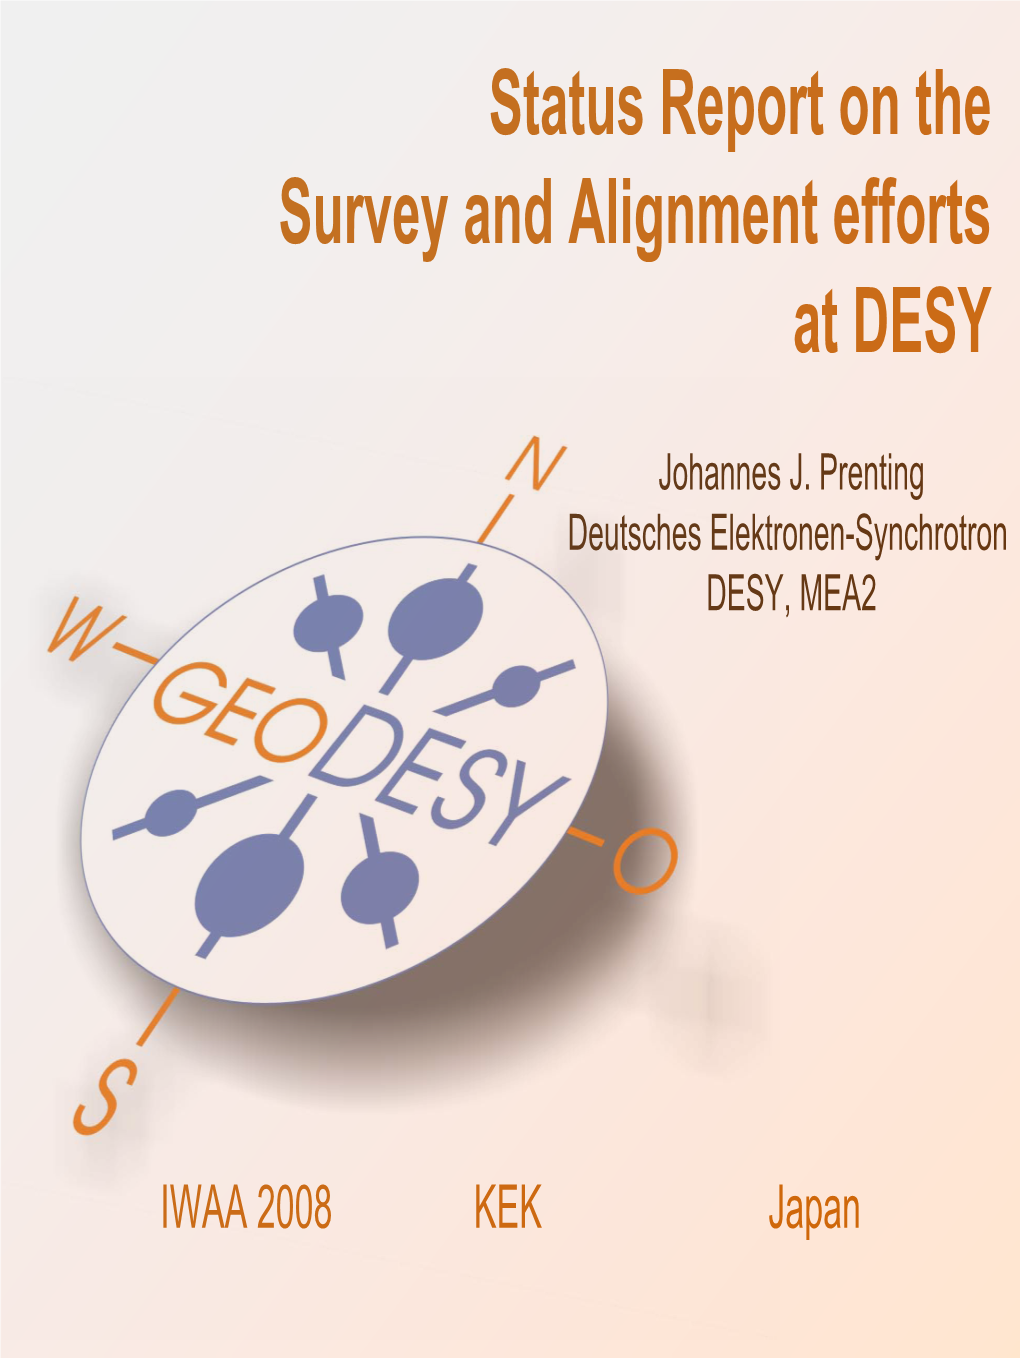 Status Report on the Survey and Alignment Efforts at DESY